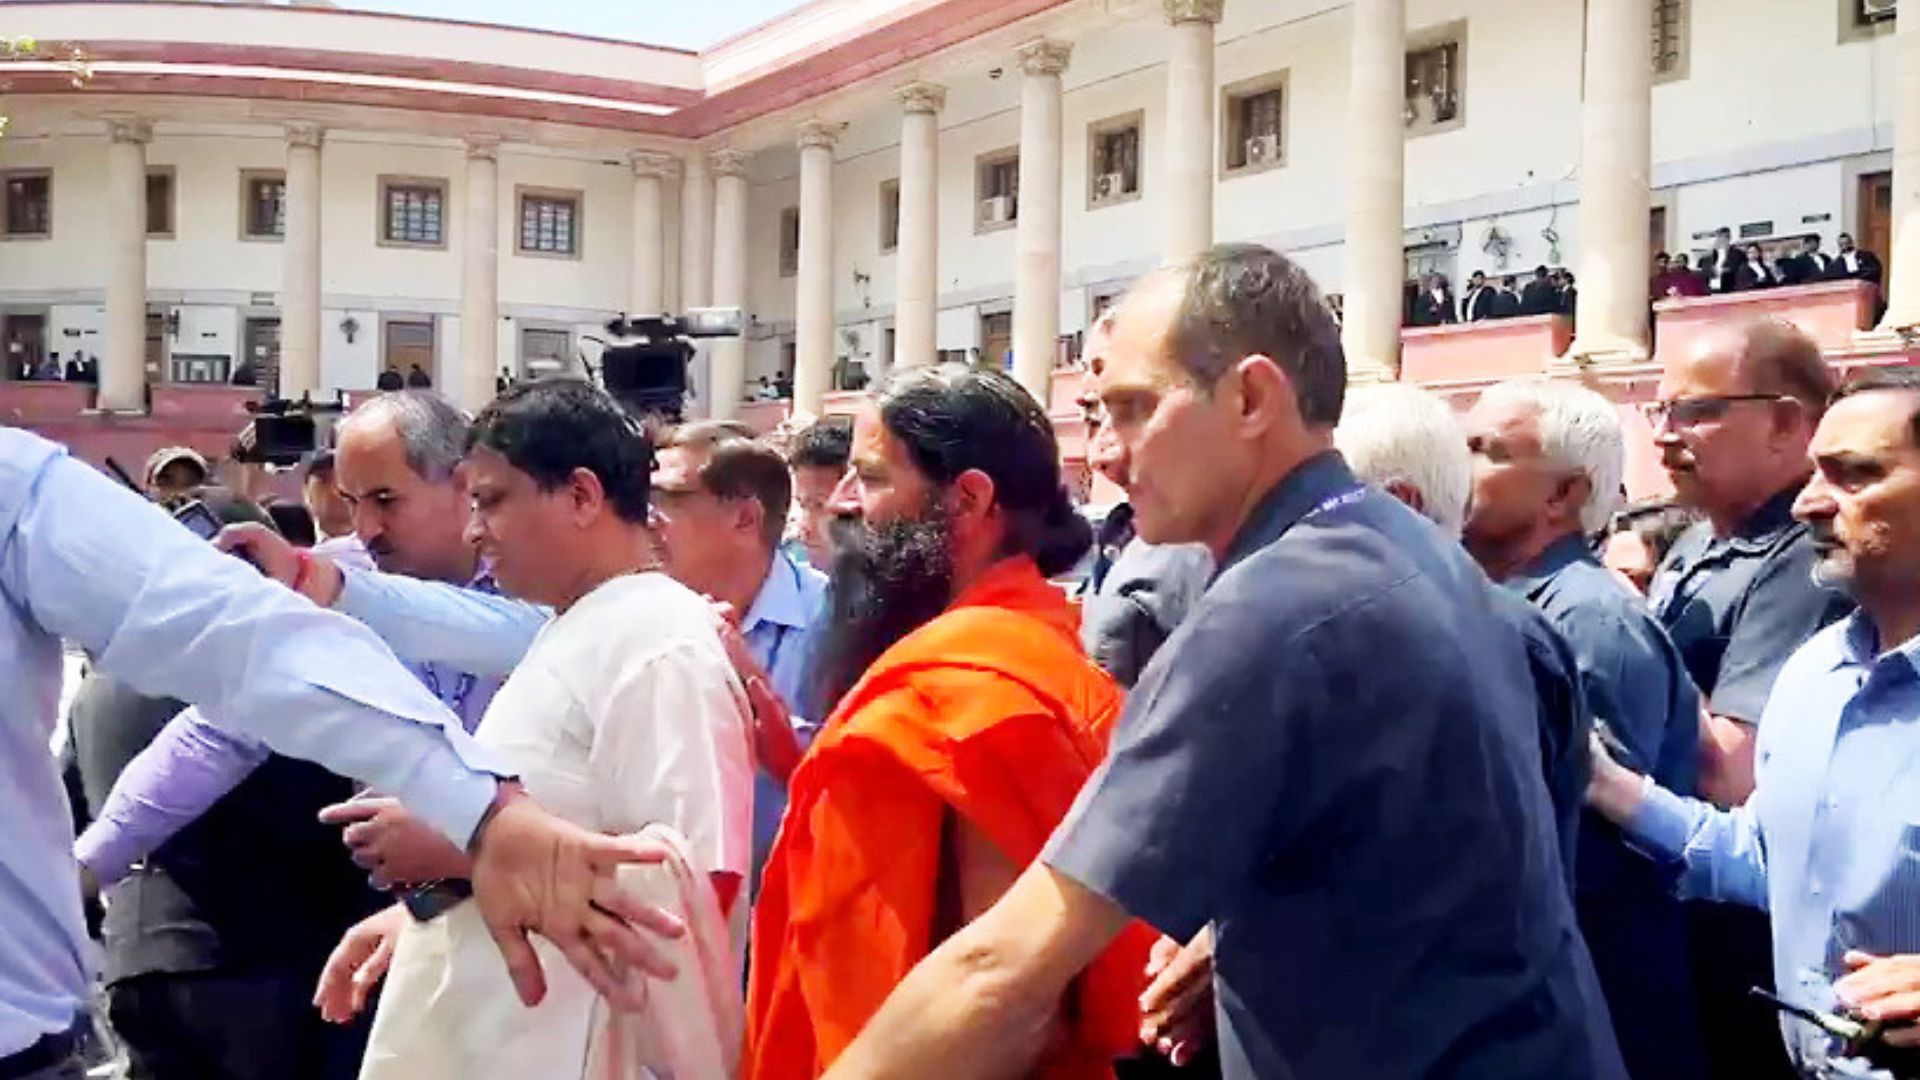 Patanjali Misleading Ads: SC asks Ramdev to place on record apology